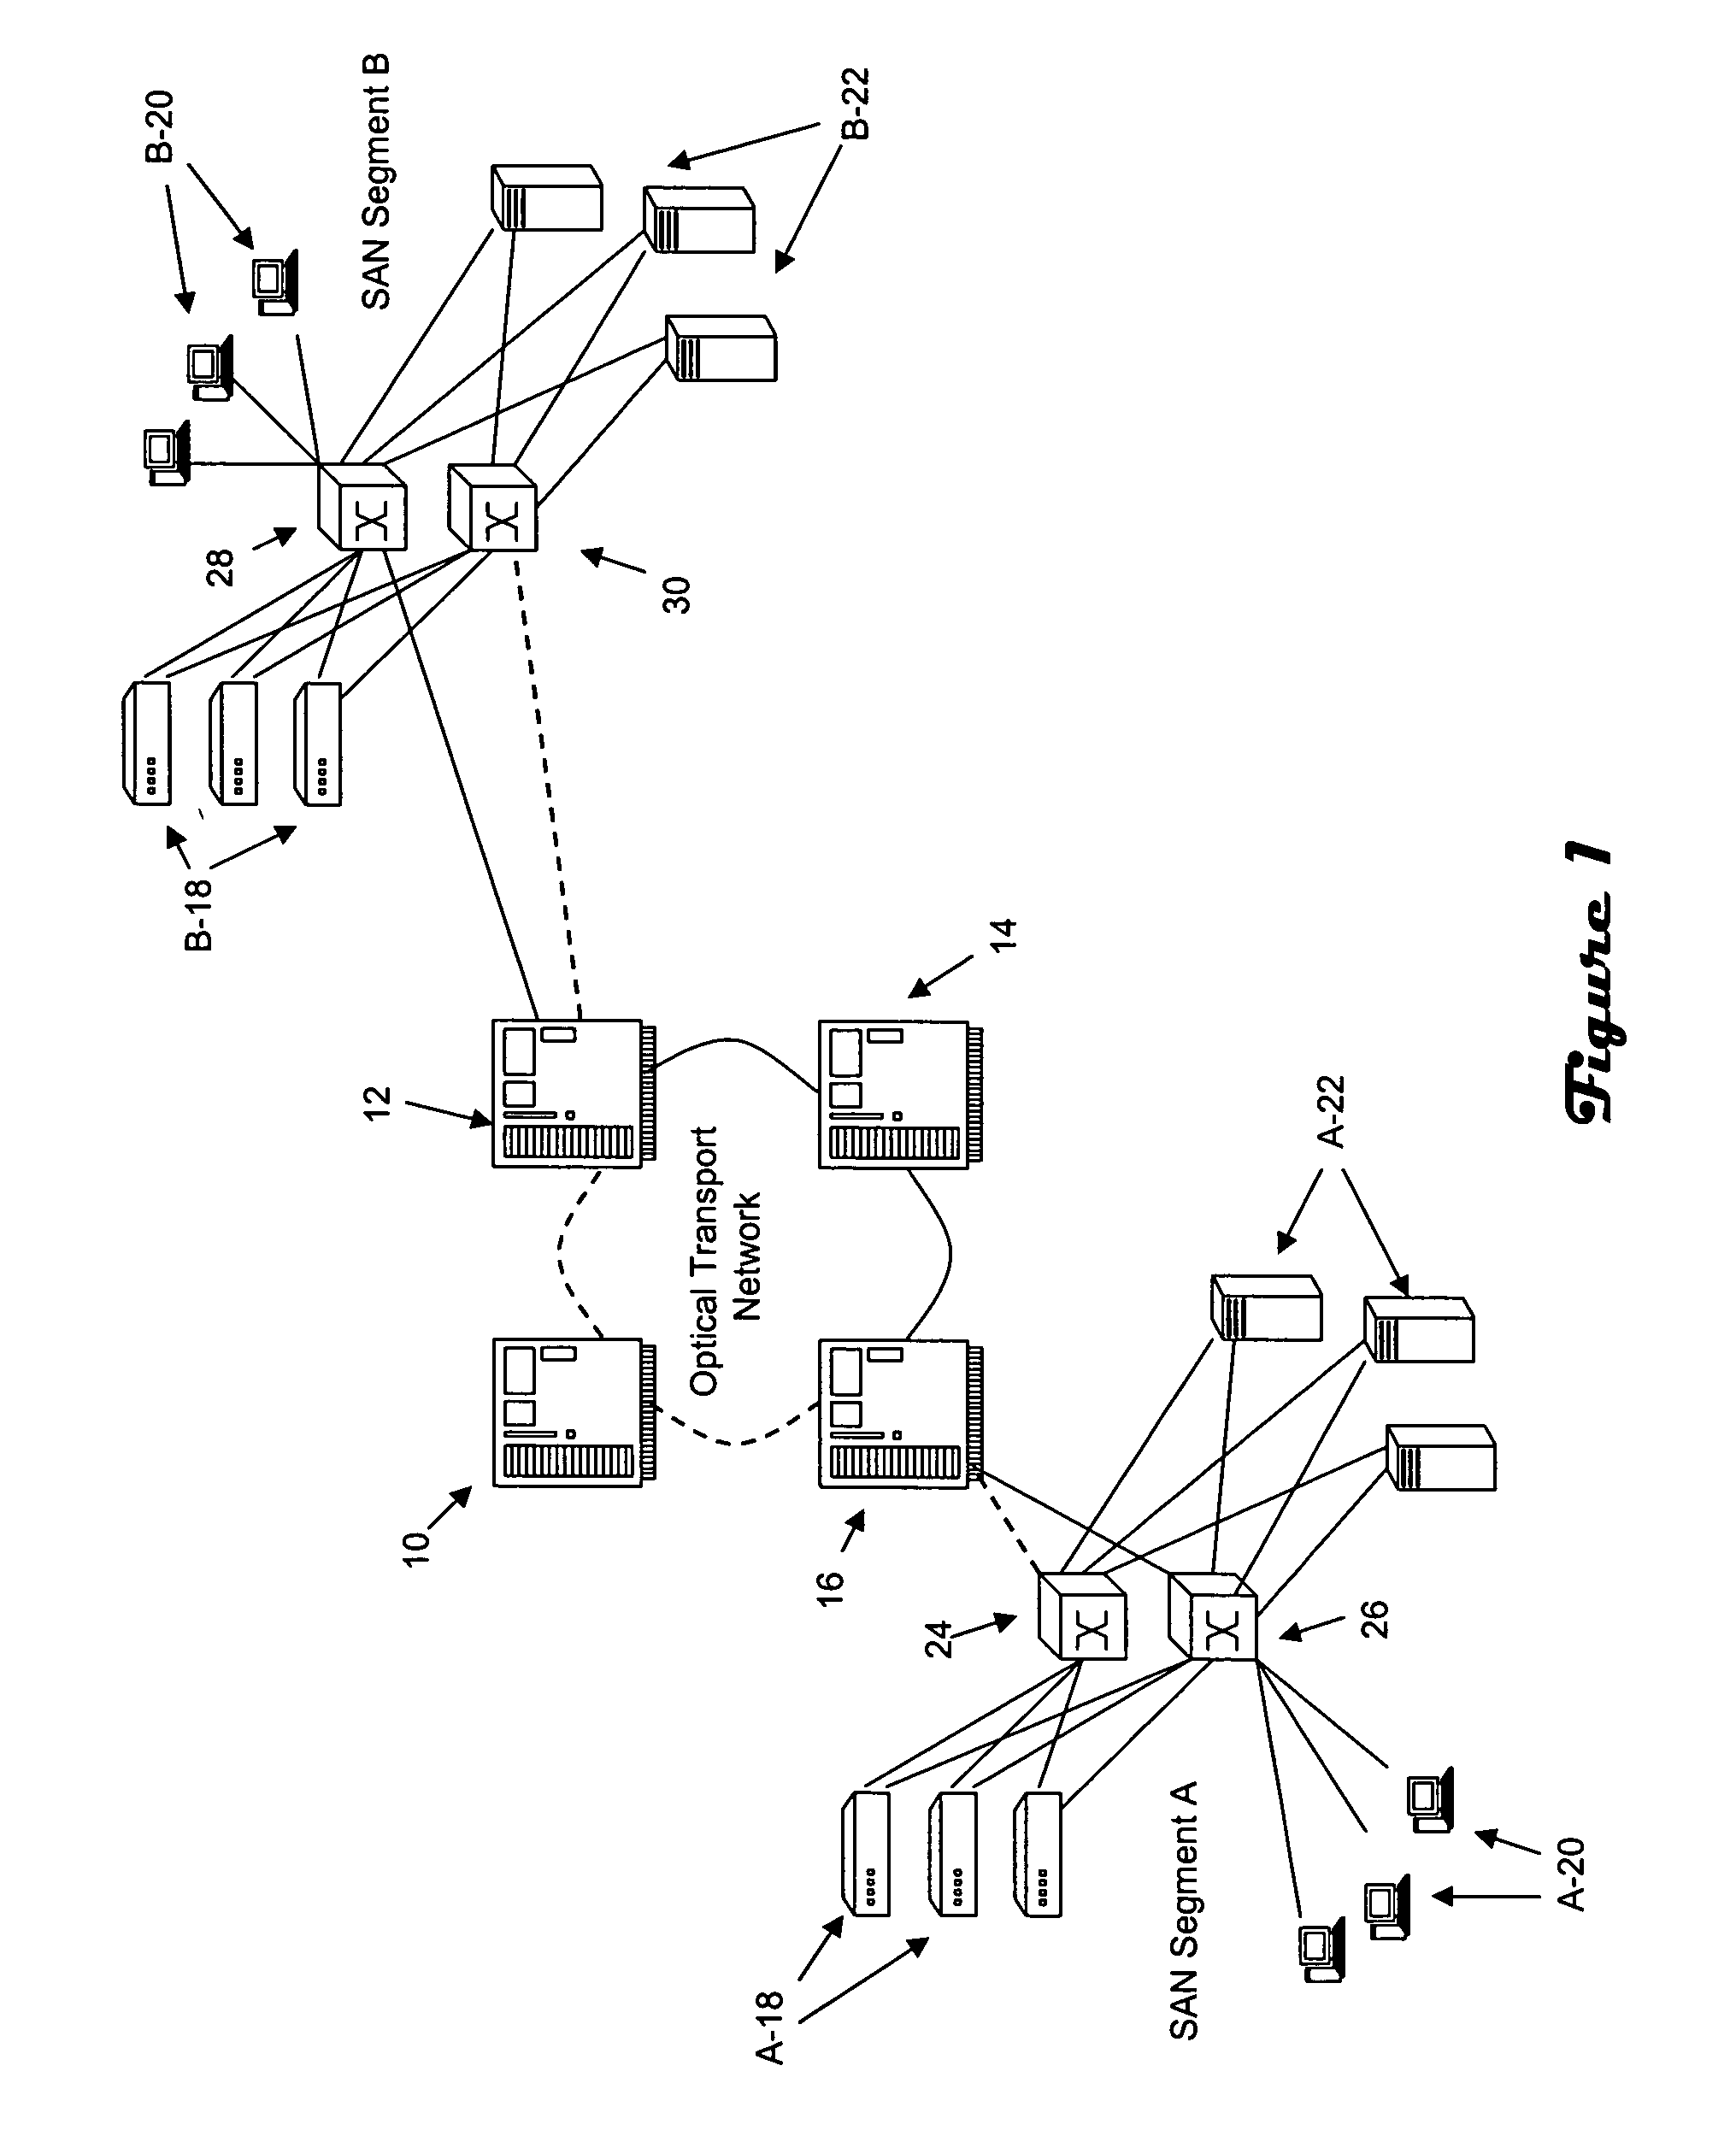 Automated network to SAN topology linkage